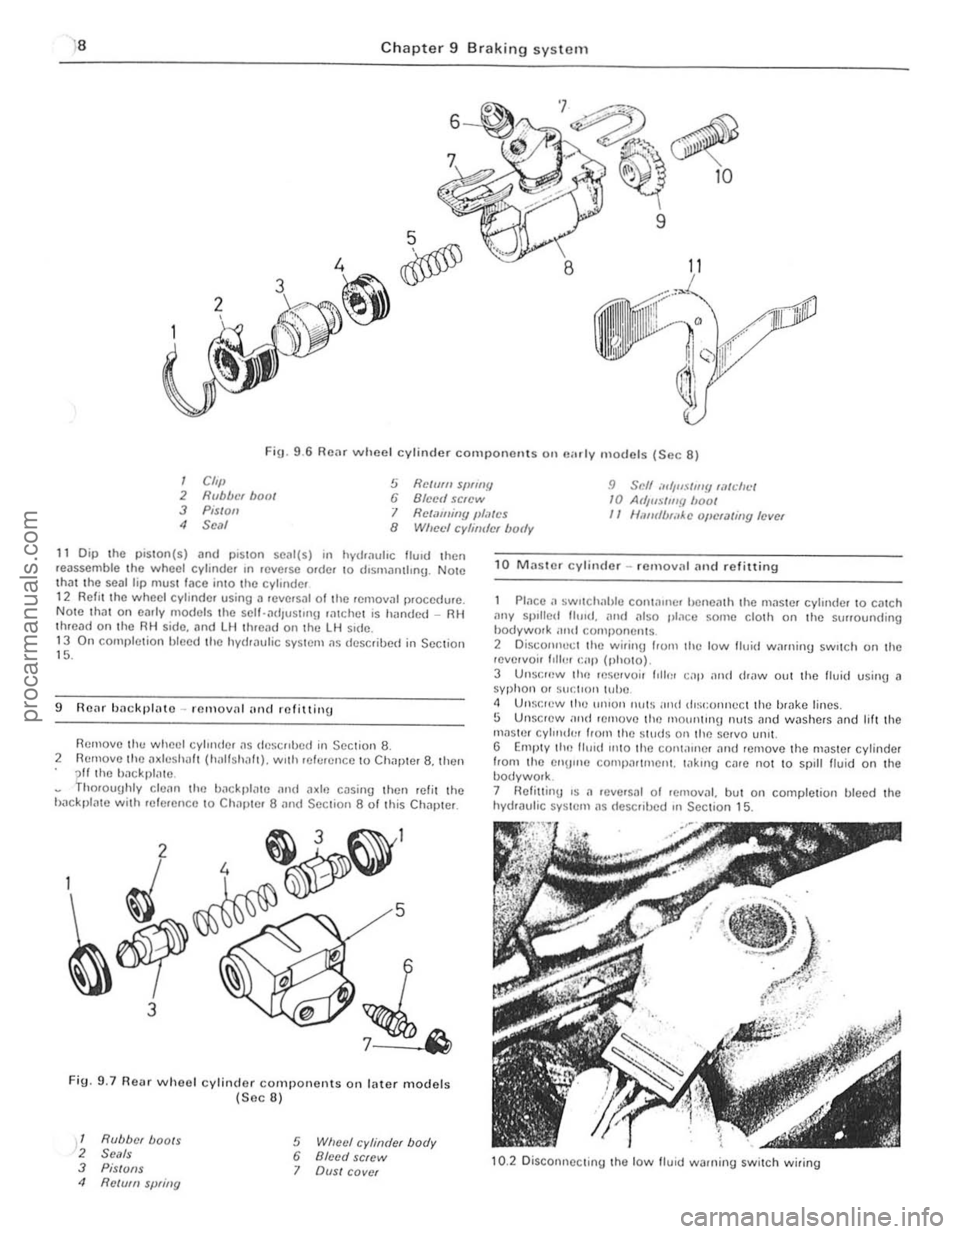 FORD CAPRI 1974  Workshop Manual )8 Chapter 9 Braking system 
8 
Fig. 9 .6 Rear wheel cylinder component s on "",I y models (Sec 8) 
I Cft,} 2 Rubber hoot 3 Pis/oil 
5 Relmll SfJflflY 6 Blcell screw 9 Scff ",,uSilll!! wtdll.:/ 10 At